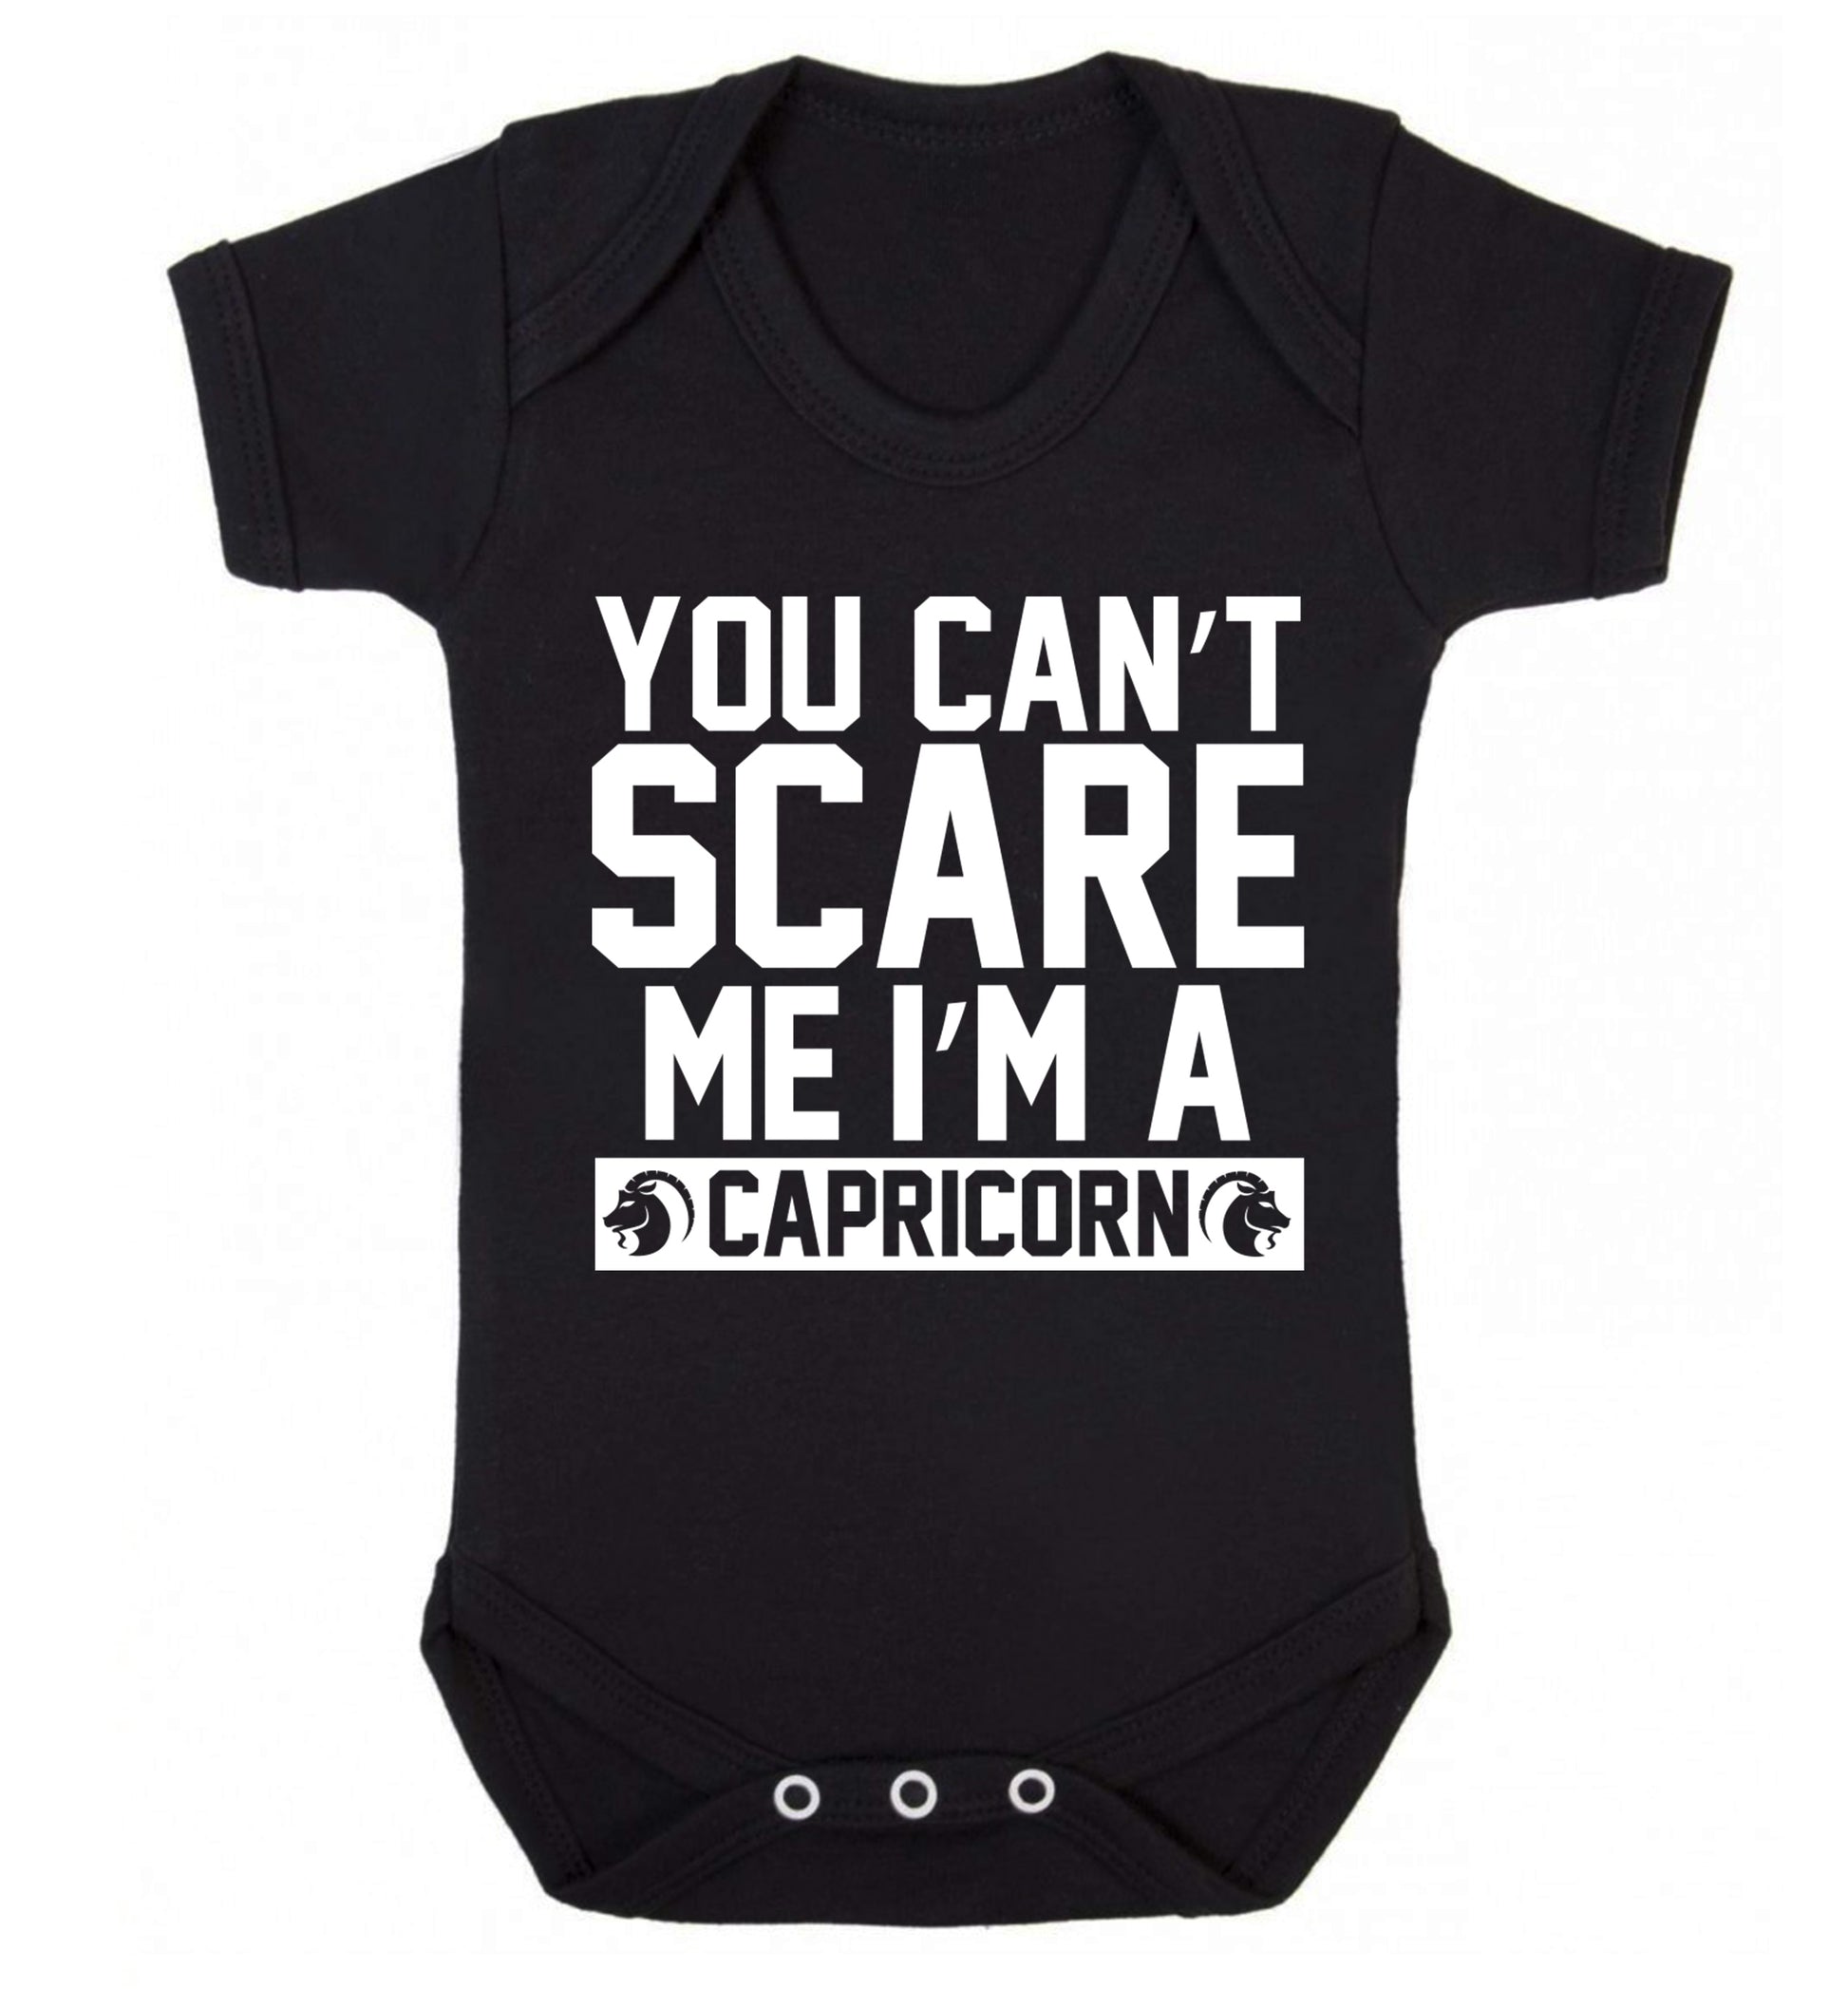 You can't scare me I'm a capricorn Baby Vest black 18-24 months